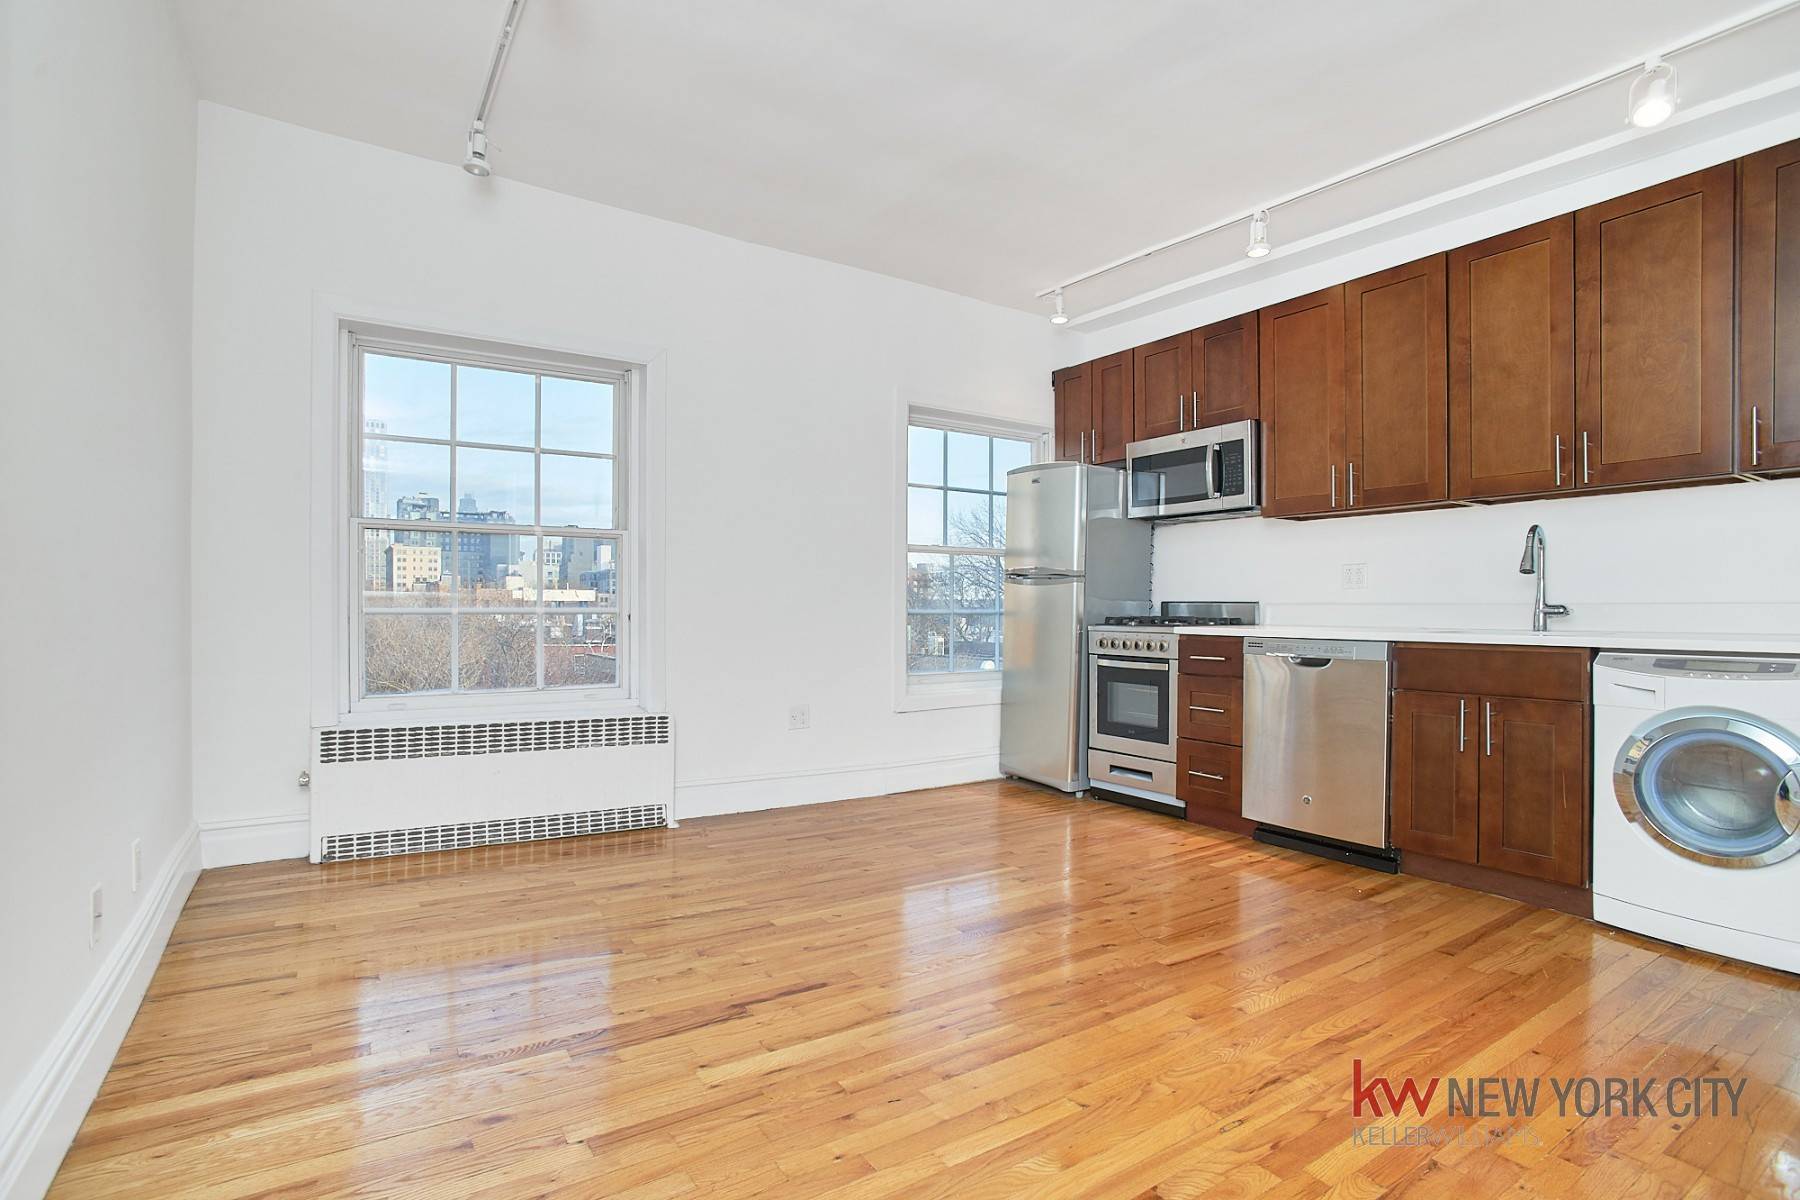 LOWEST PRICED one bedroom available for rent in Brooklyn Heights that has laundry in unit, dishwasher, and a private patio !